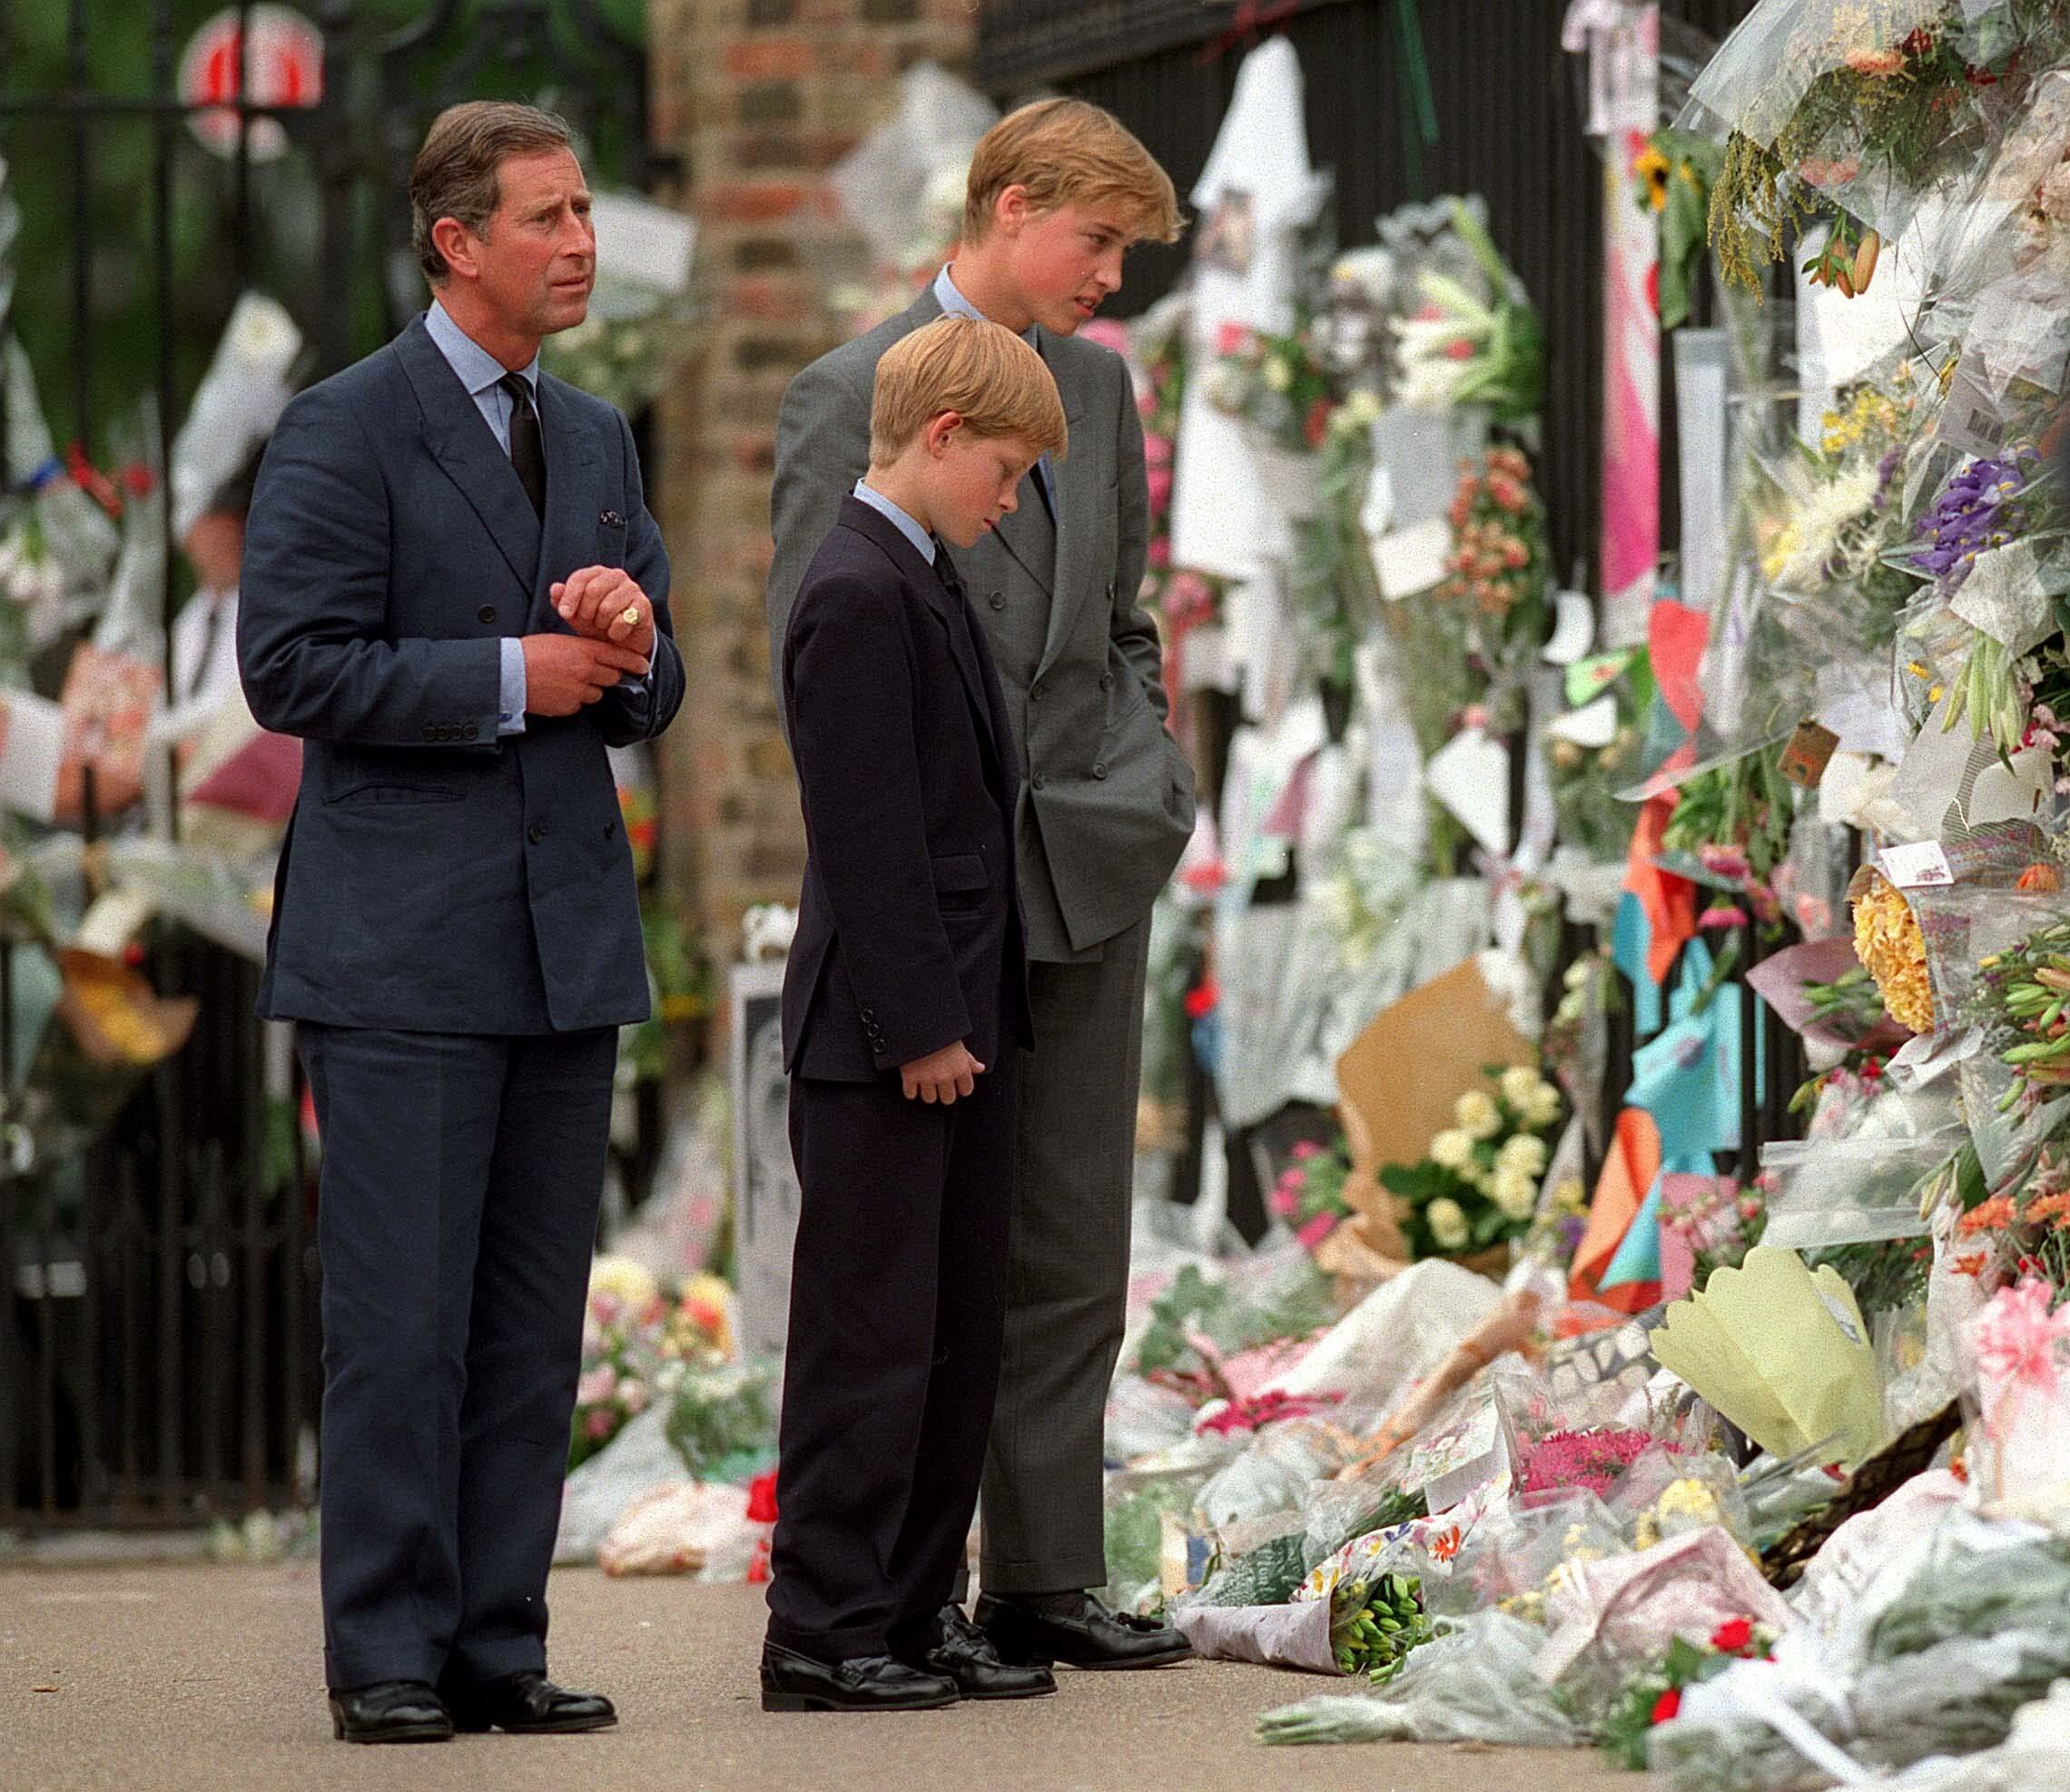 Prince Charles, Prince William and Prince Harry look at floral tributes to Diana, Princess of Wales outside Kensington Palace on September 5, 1997 in London, England | Source: Getty Images